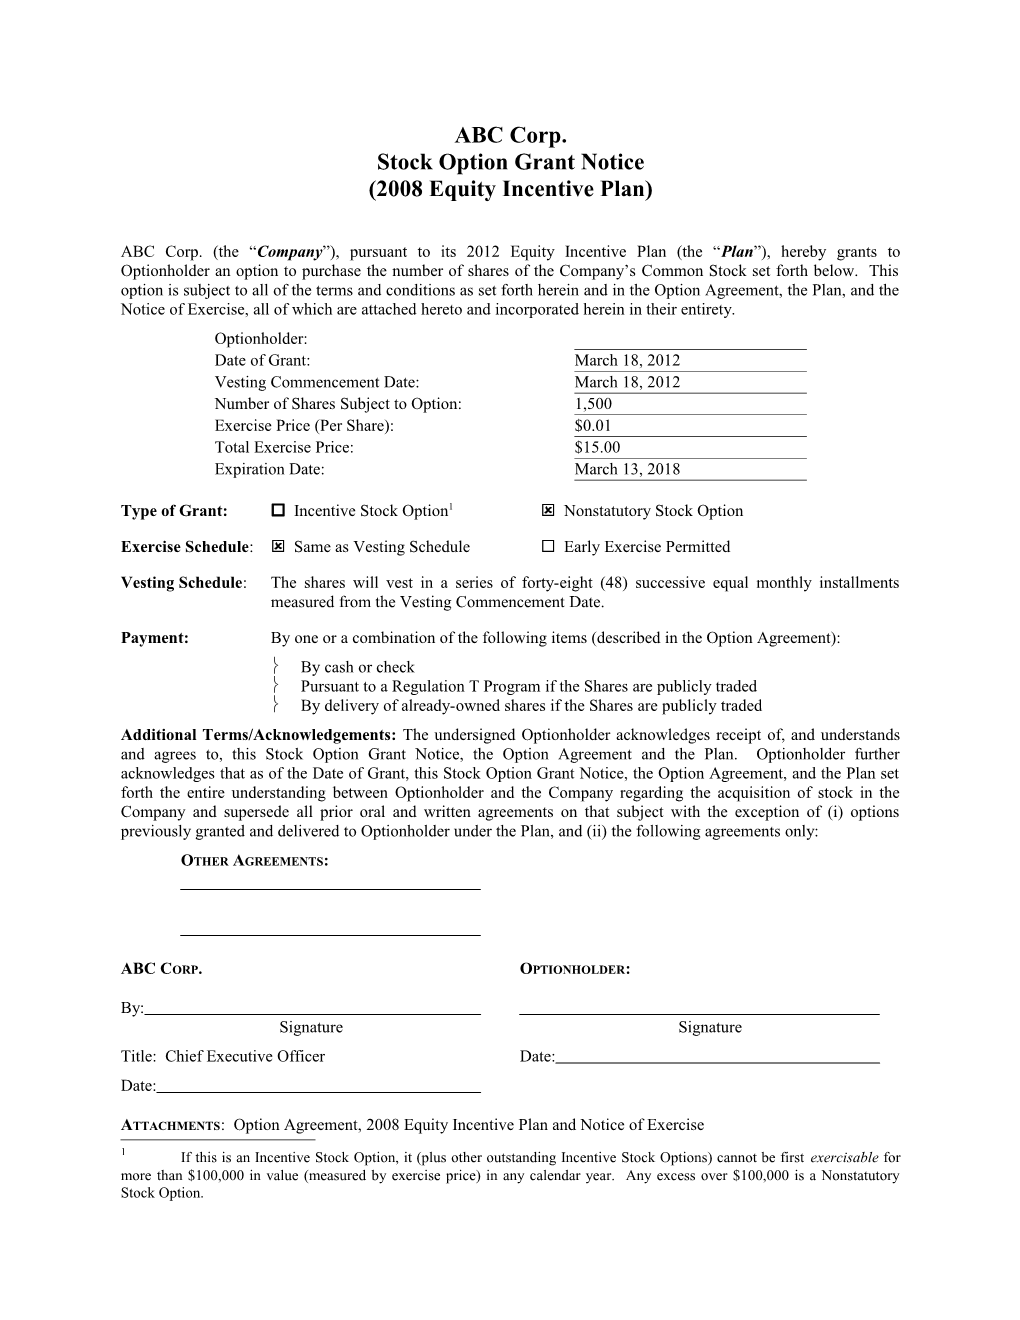 ABC Corp. Stock Option Grant Notice (2008 Equity Incentive Plan)